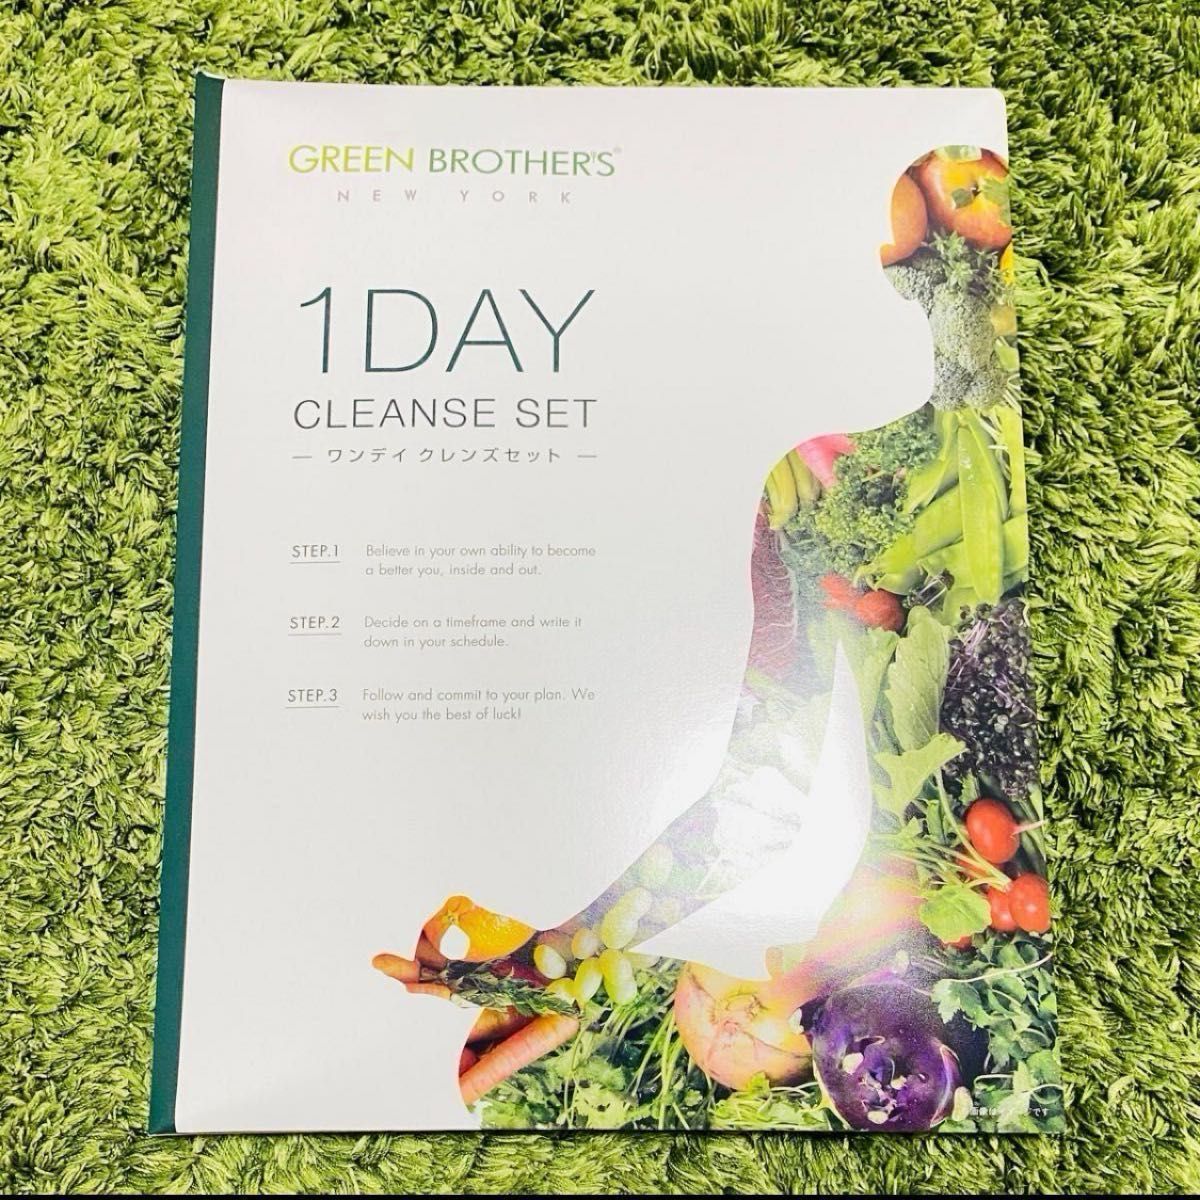 GREEN BROTHERS 1DAY CLEANSE SET GB1DAYクレンズ